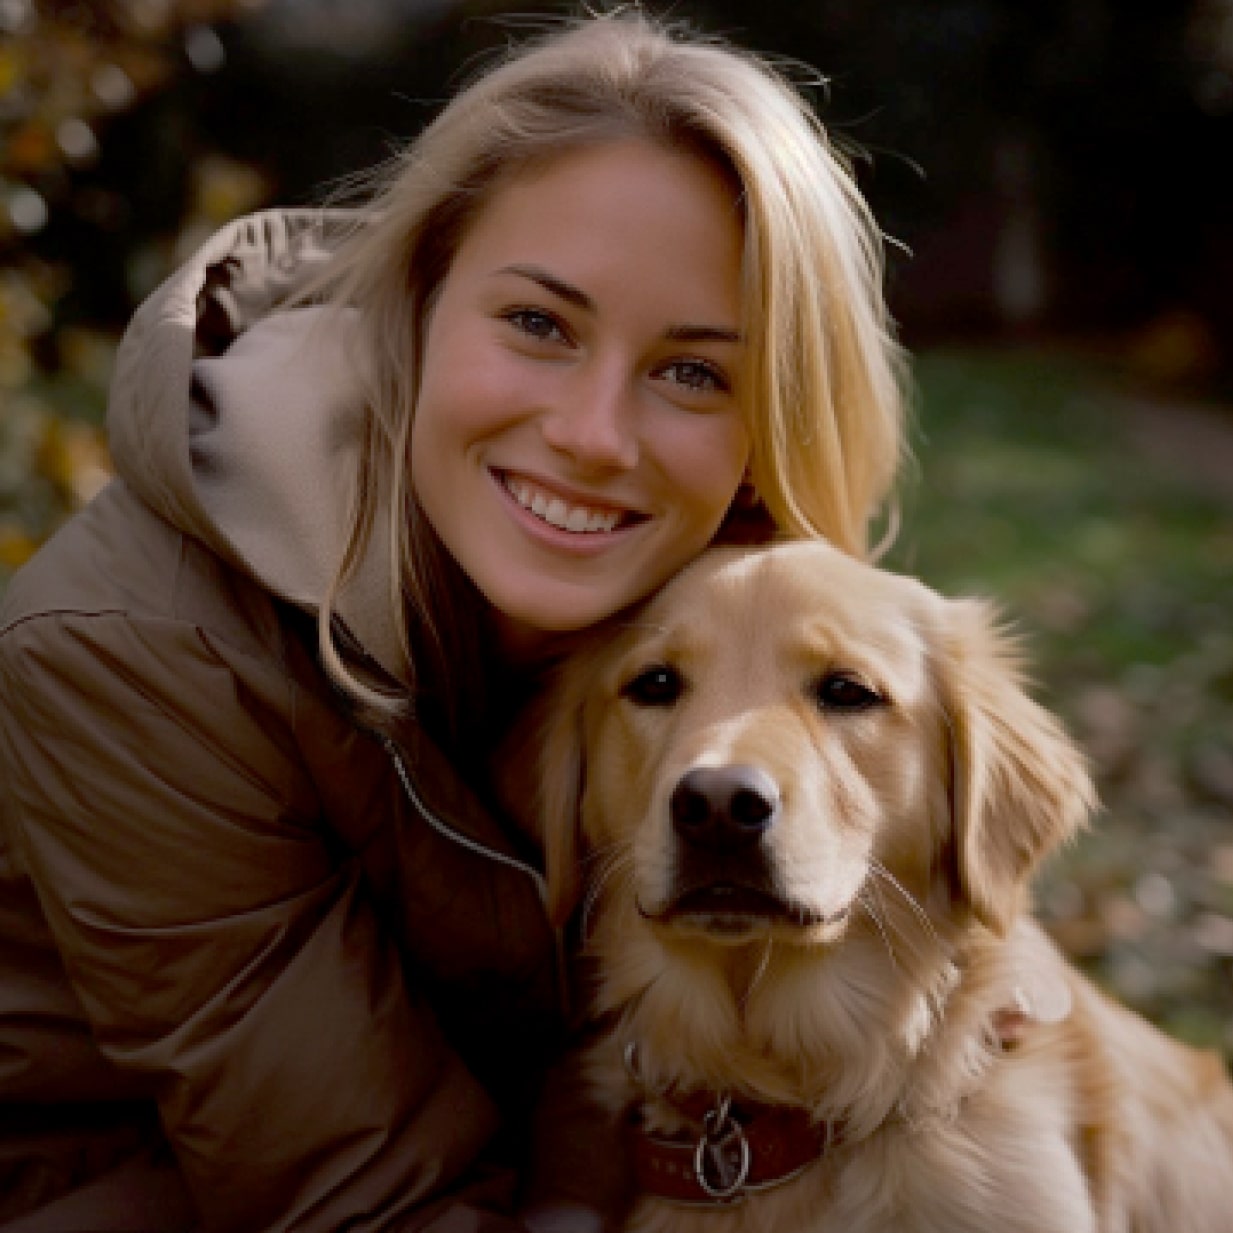 the photo of Emma and her dog